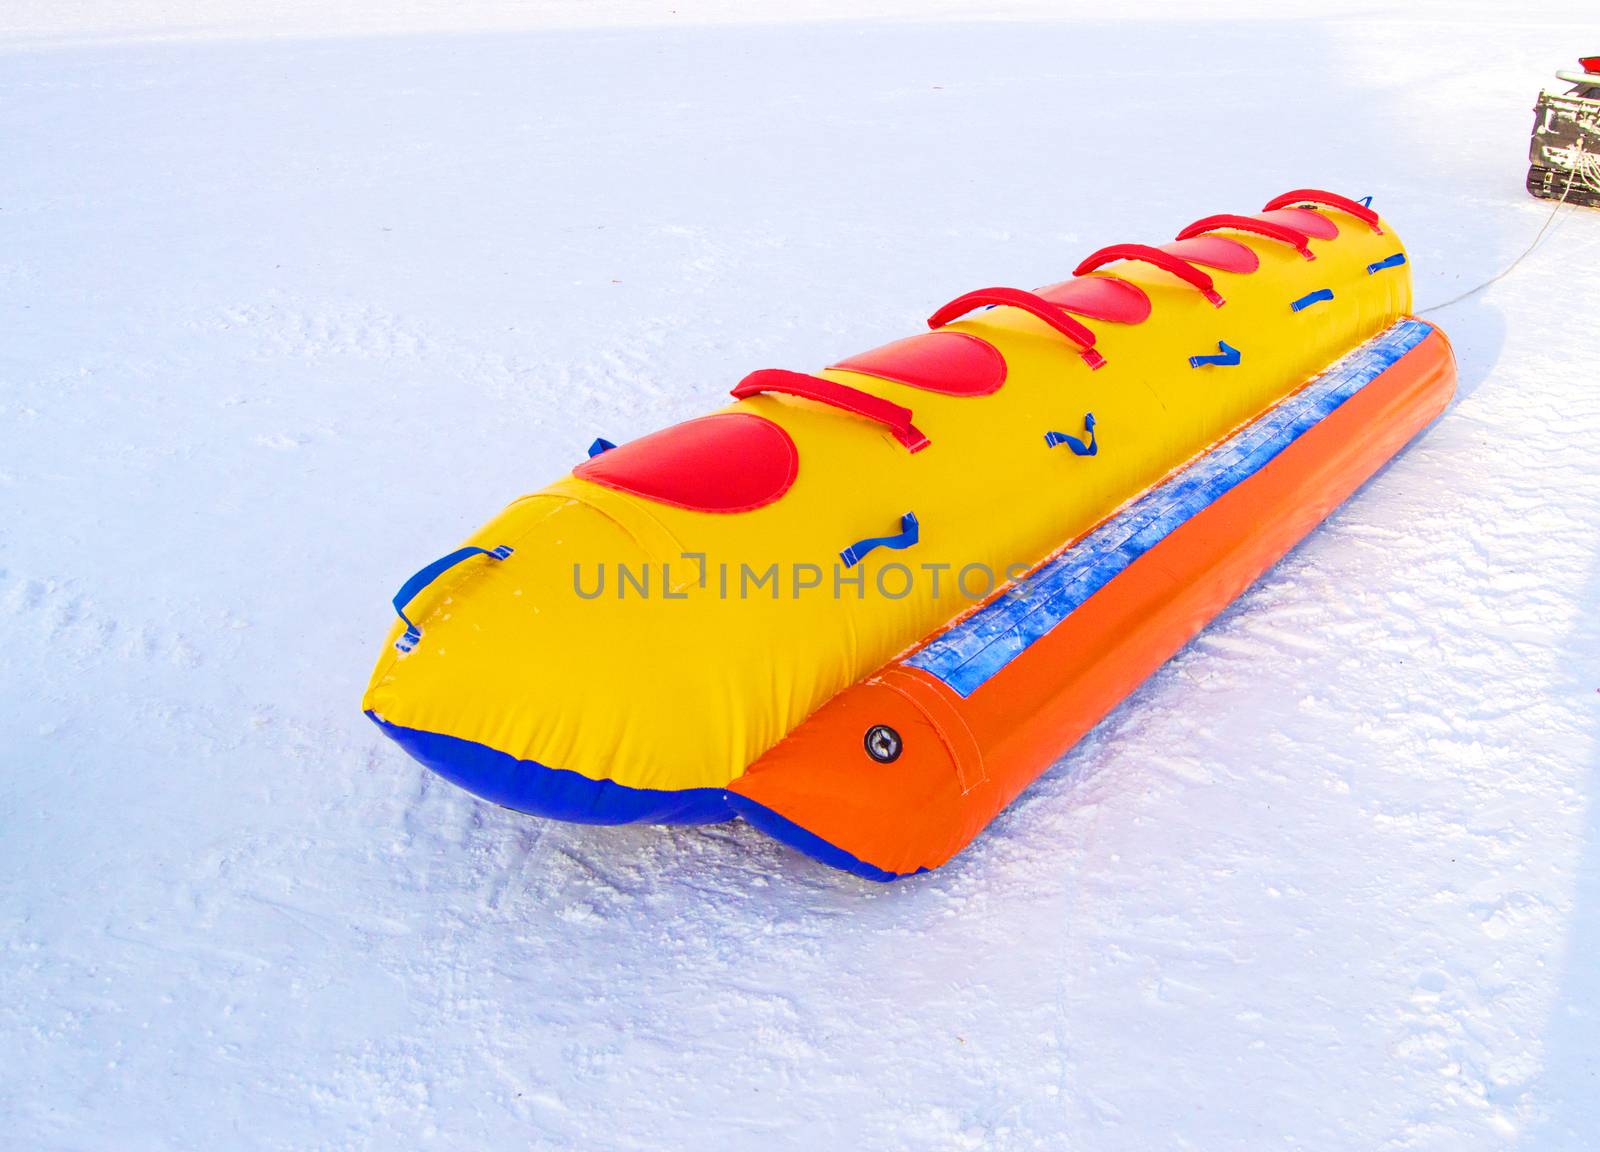 Inflatable rubber multi-seat sleigh for high-speed snow skiing in winter, winter activity concept and Christmas fun by claire_lucia